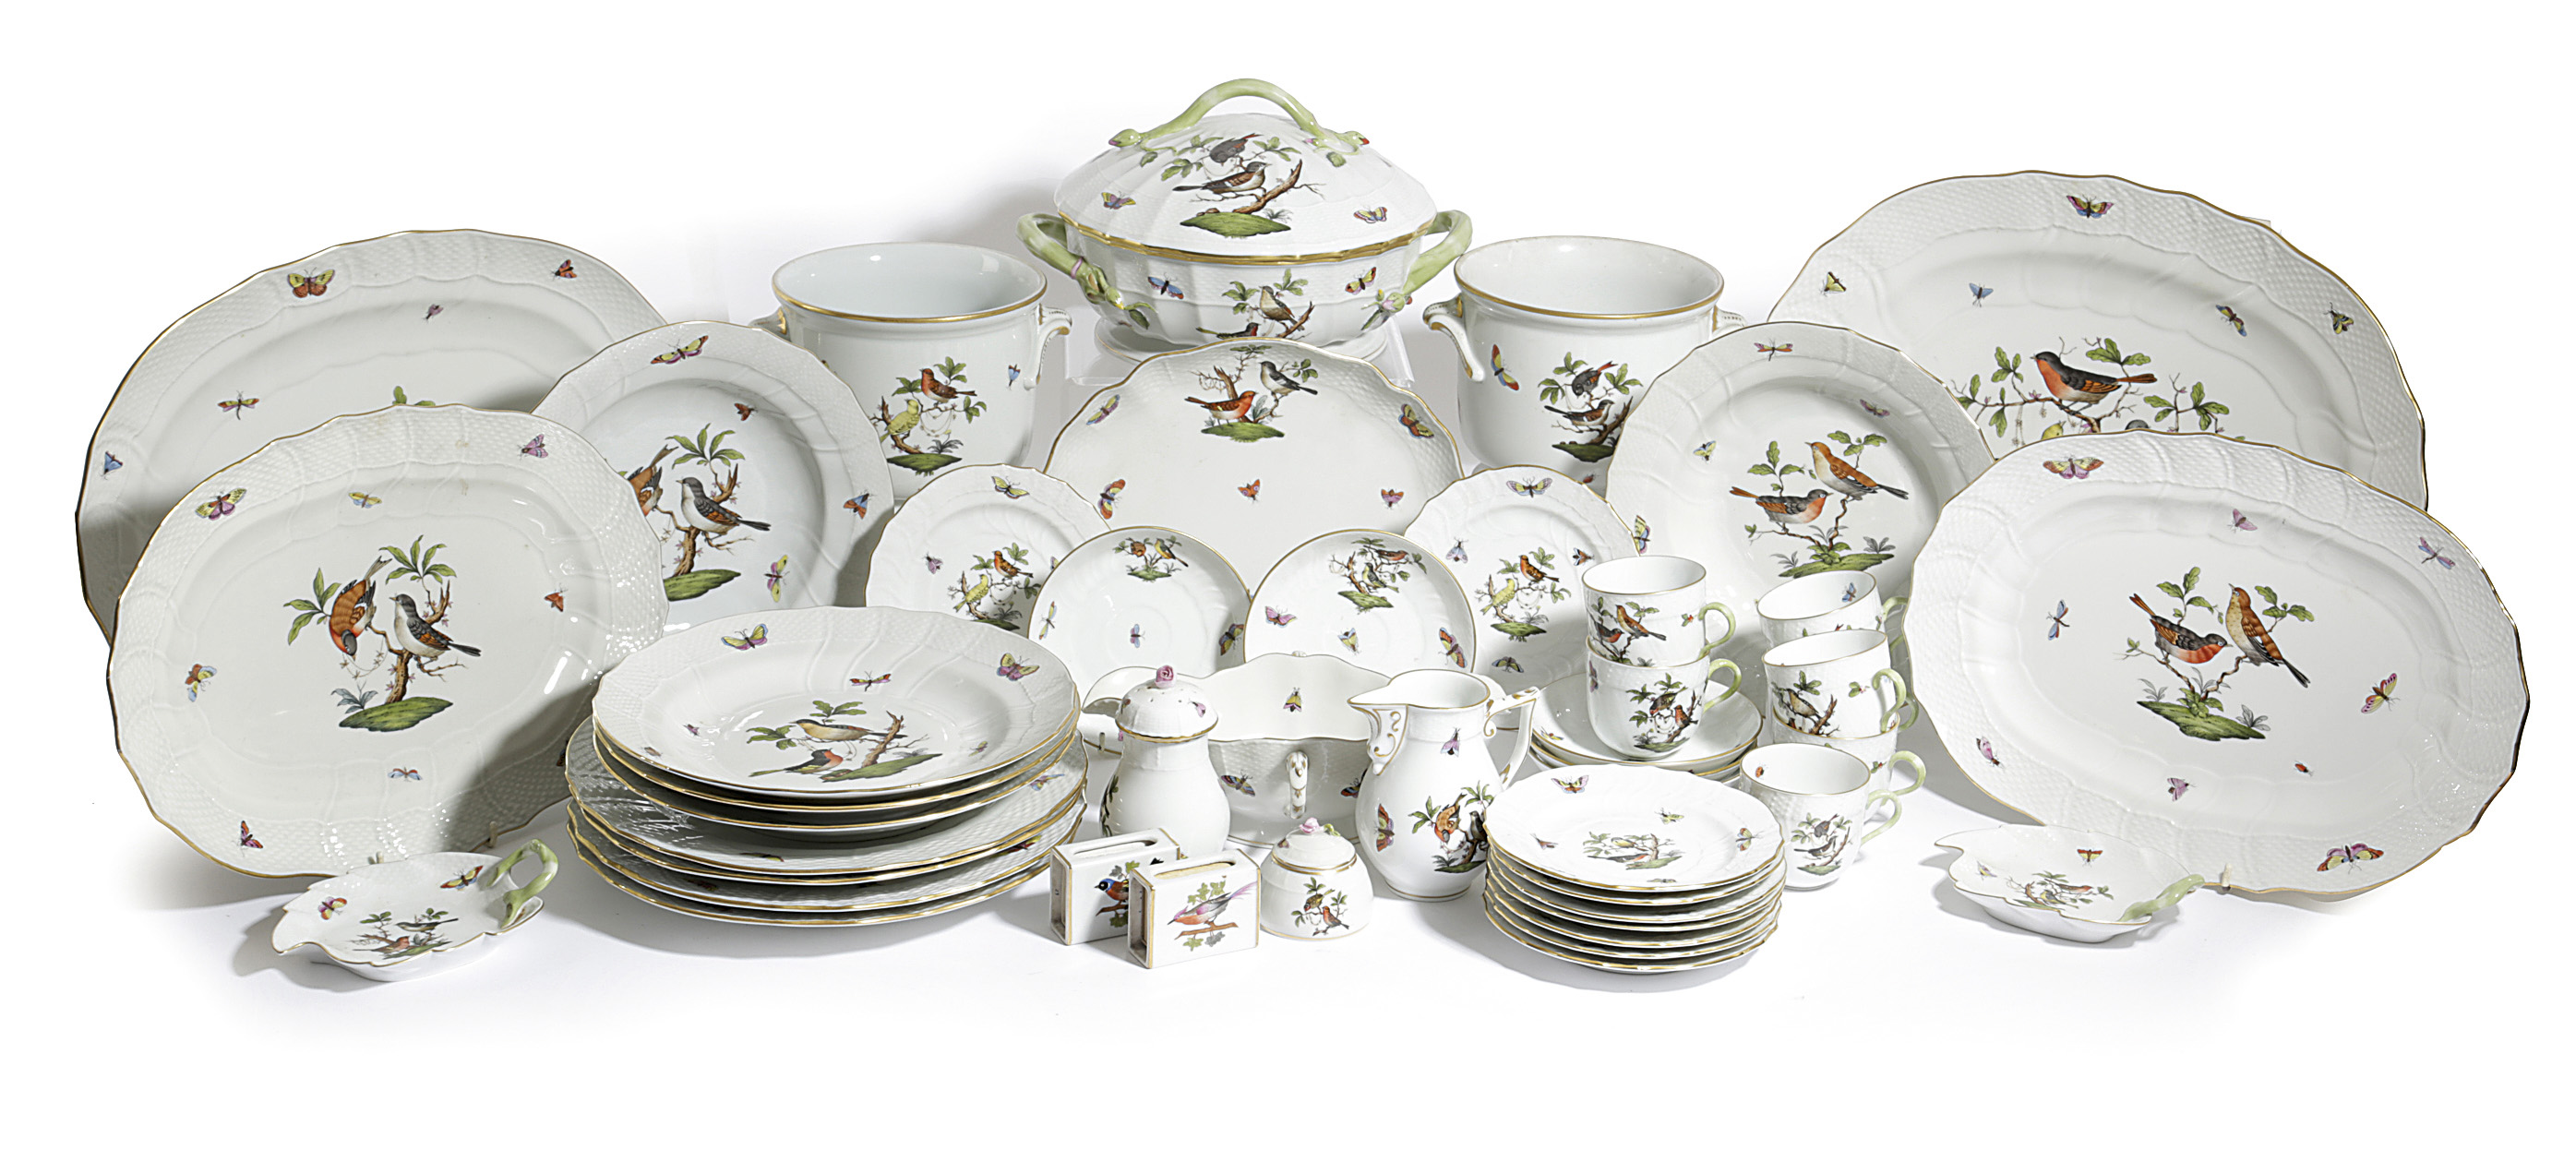 AMENDED - A HEREND PORCELAIN PART DINNER AND TEA SERVICE 20TH CENTURY in the Rothschild